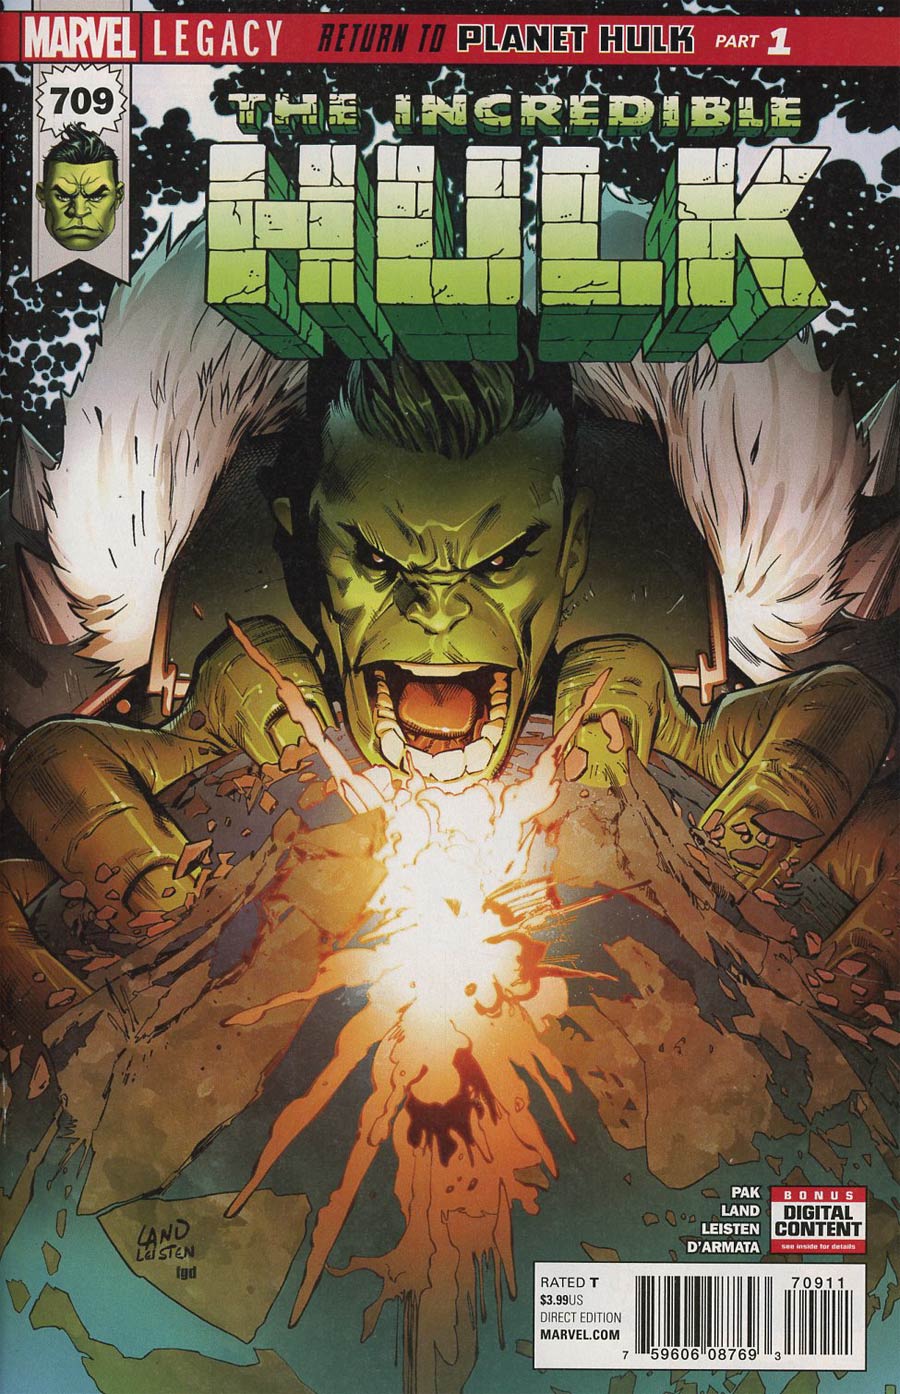 Incredible Hulk Vol 4 #709 Cover A 1st Ptg Regular Greg Land Cover (Marvel Legacy Tie-In)